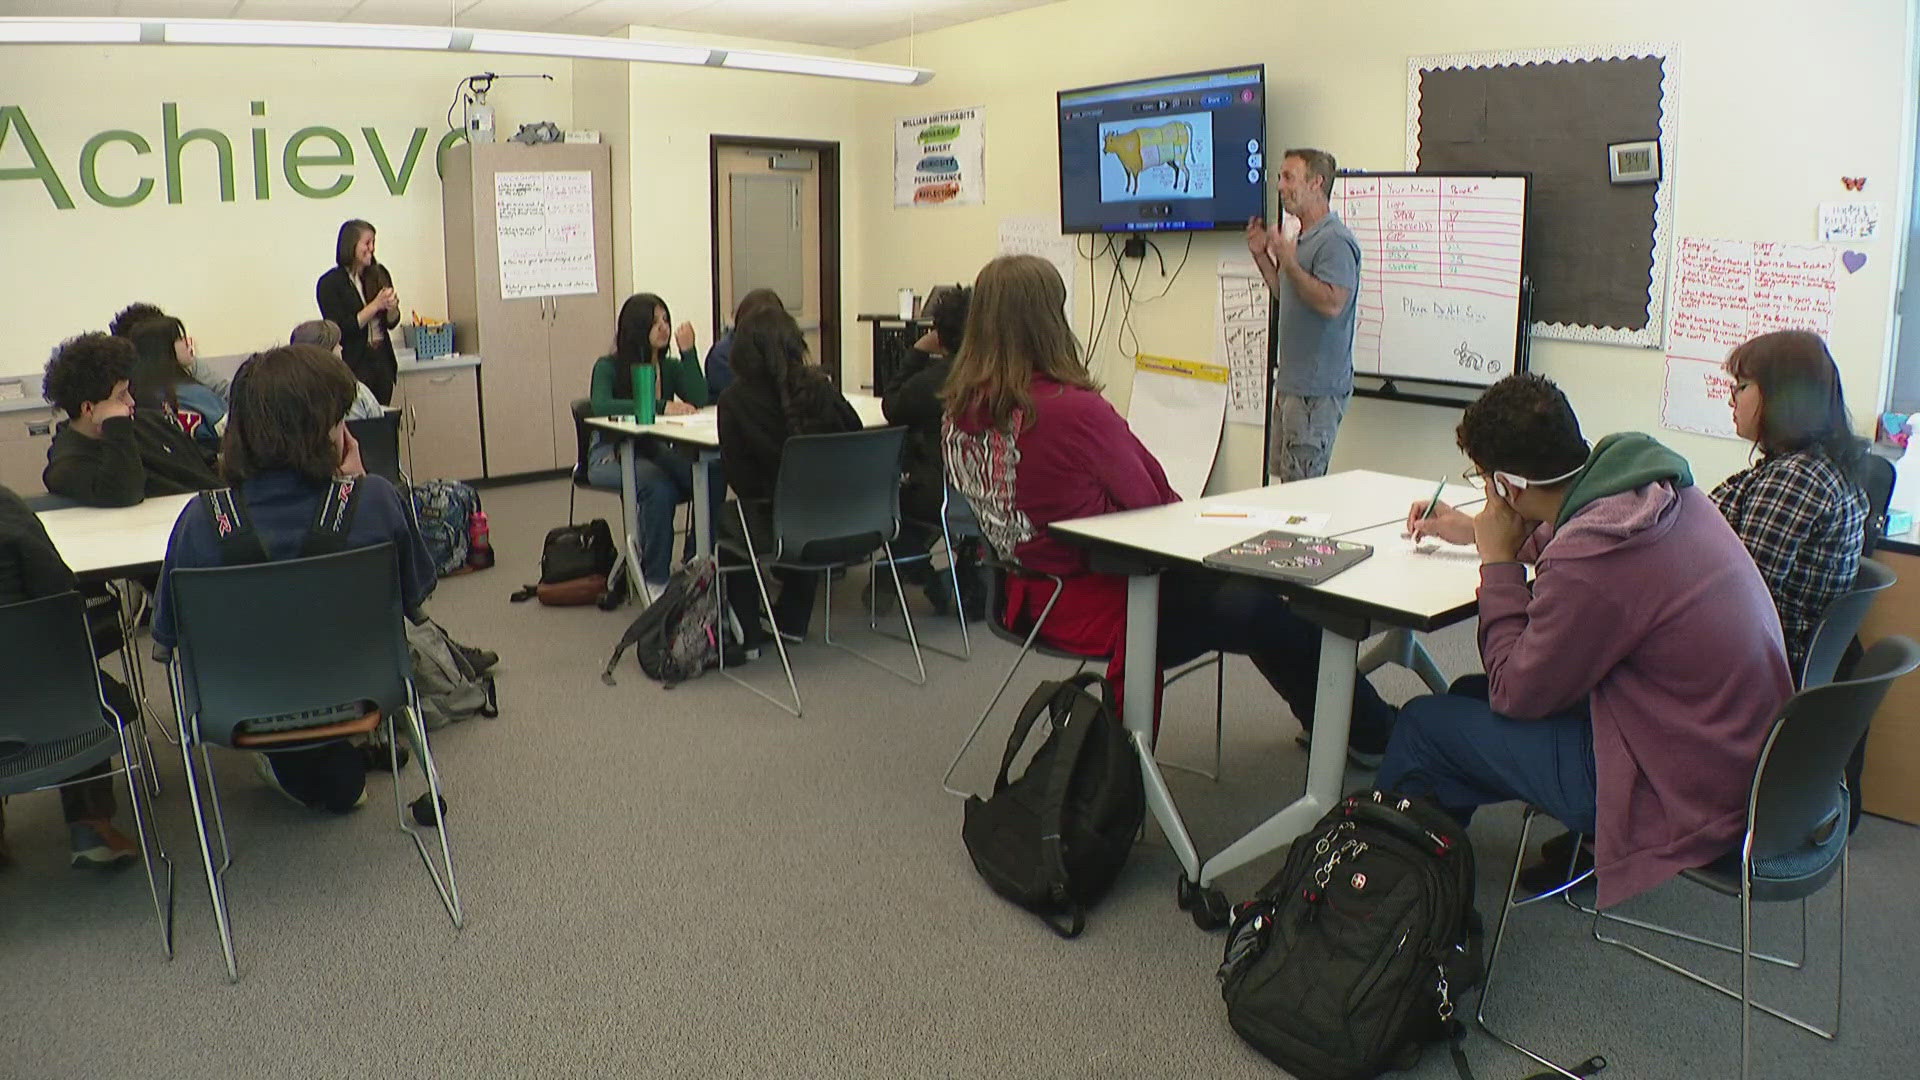 Students at William Smith High School in Aurora who enroll in "Wolf Empire" study the wolves reintroduced to Colorado through a combined math and literacy class.